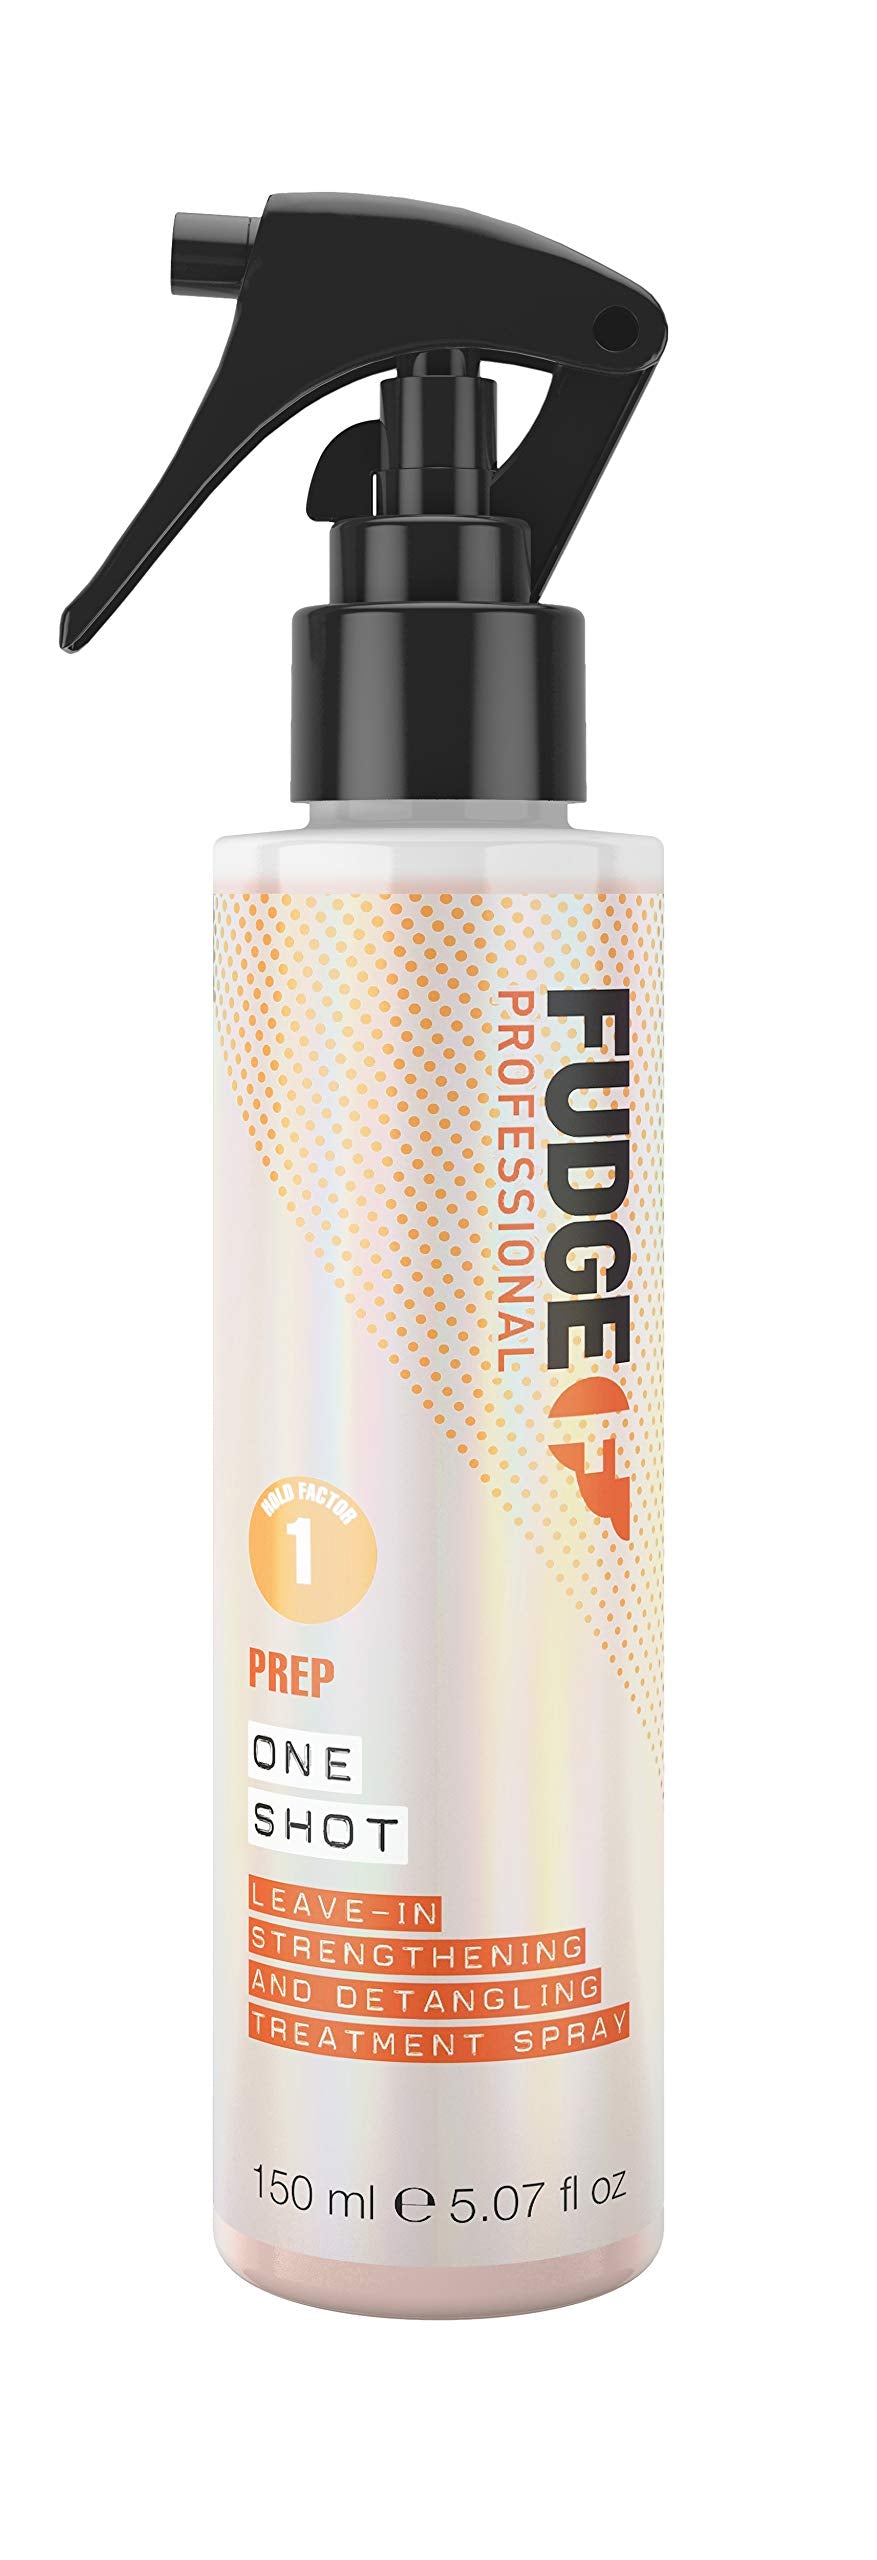 Fudge Professional Leave In Conditioner, One Shot Treatment Spray, Detangling and Strengthening Treatment For Dry and Damaged Hair, 150 ml